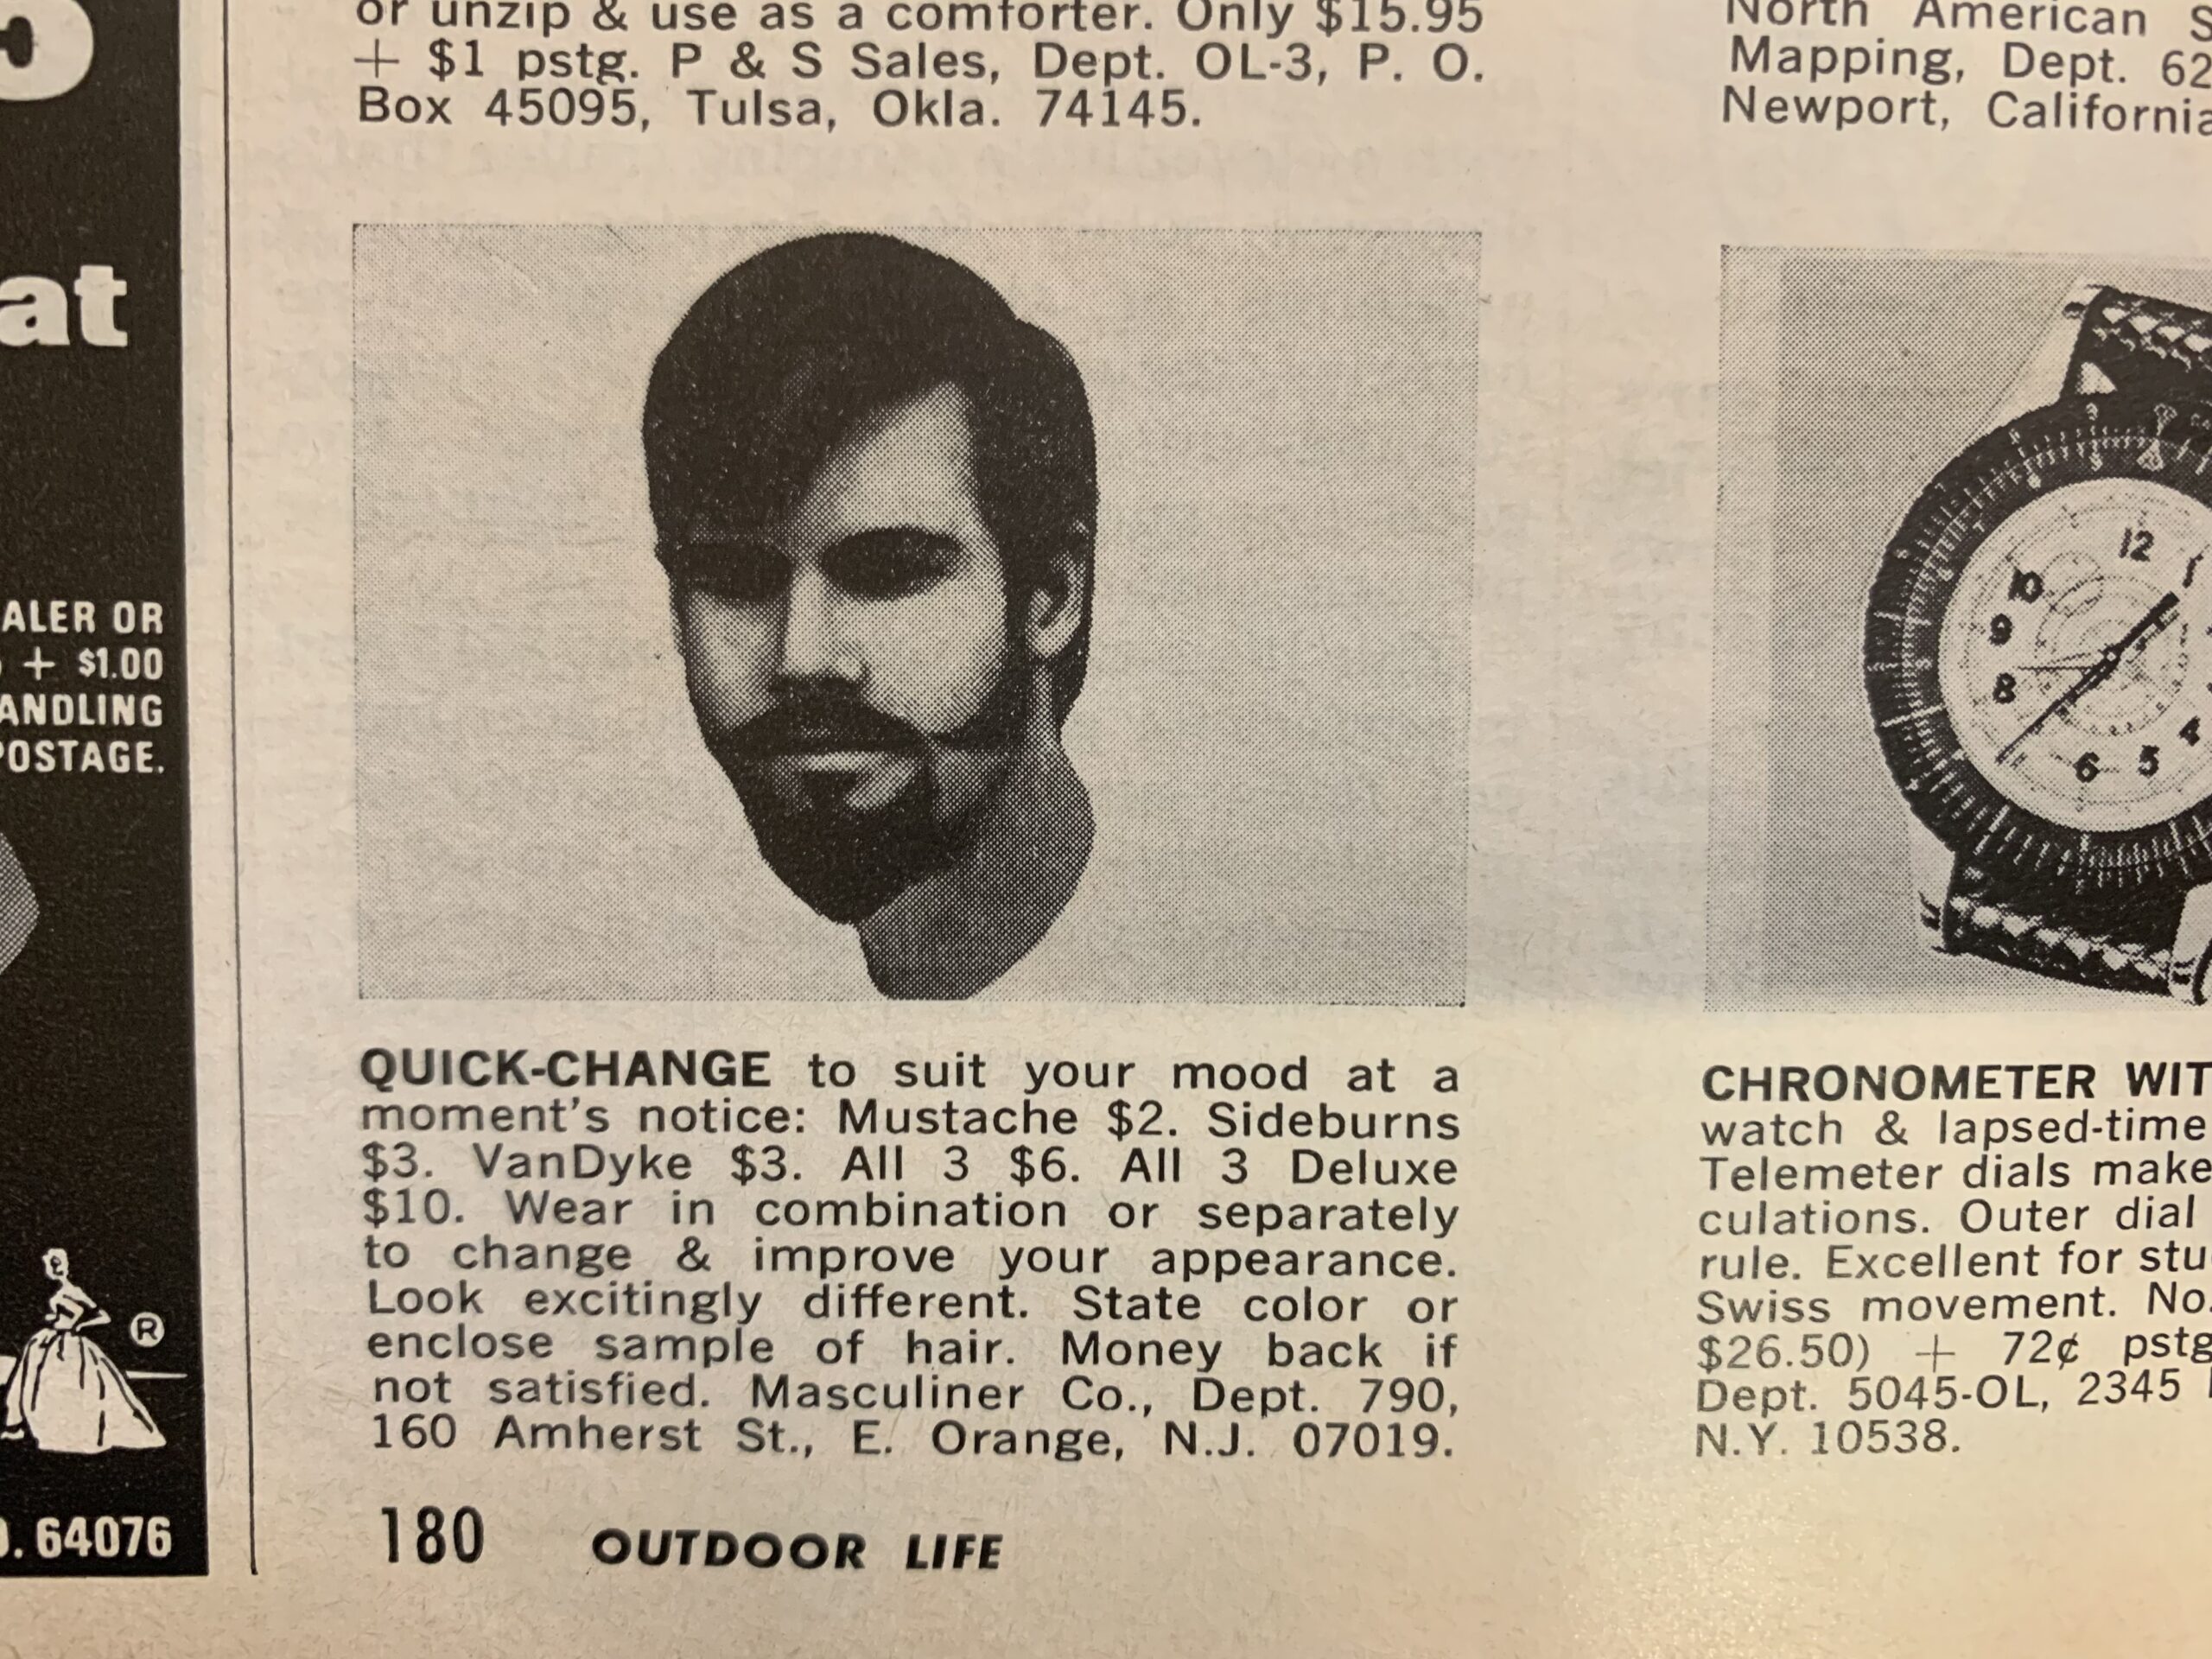 Even fake facial hair has been advertised in Outdoor Life